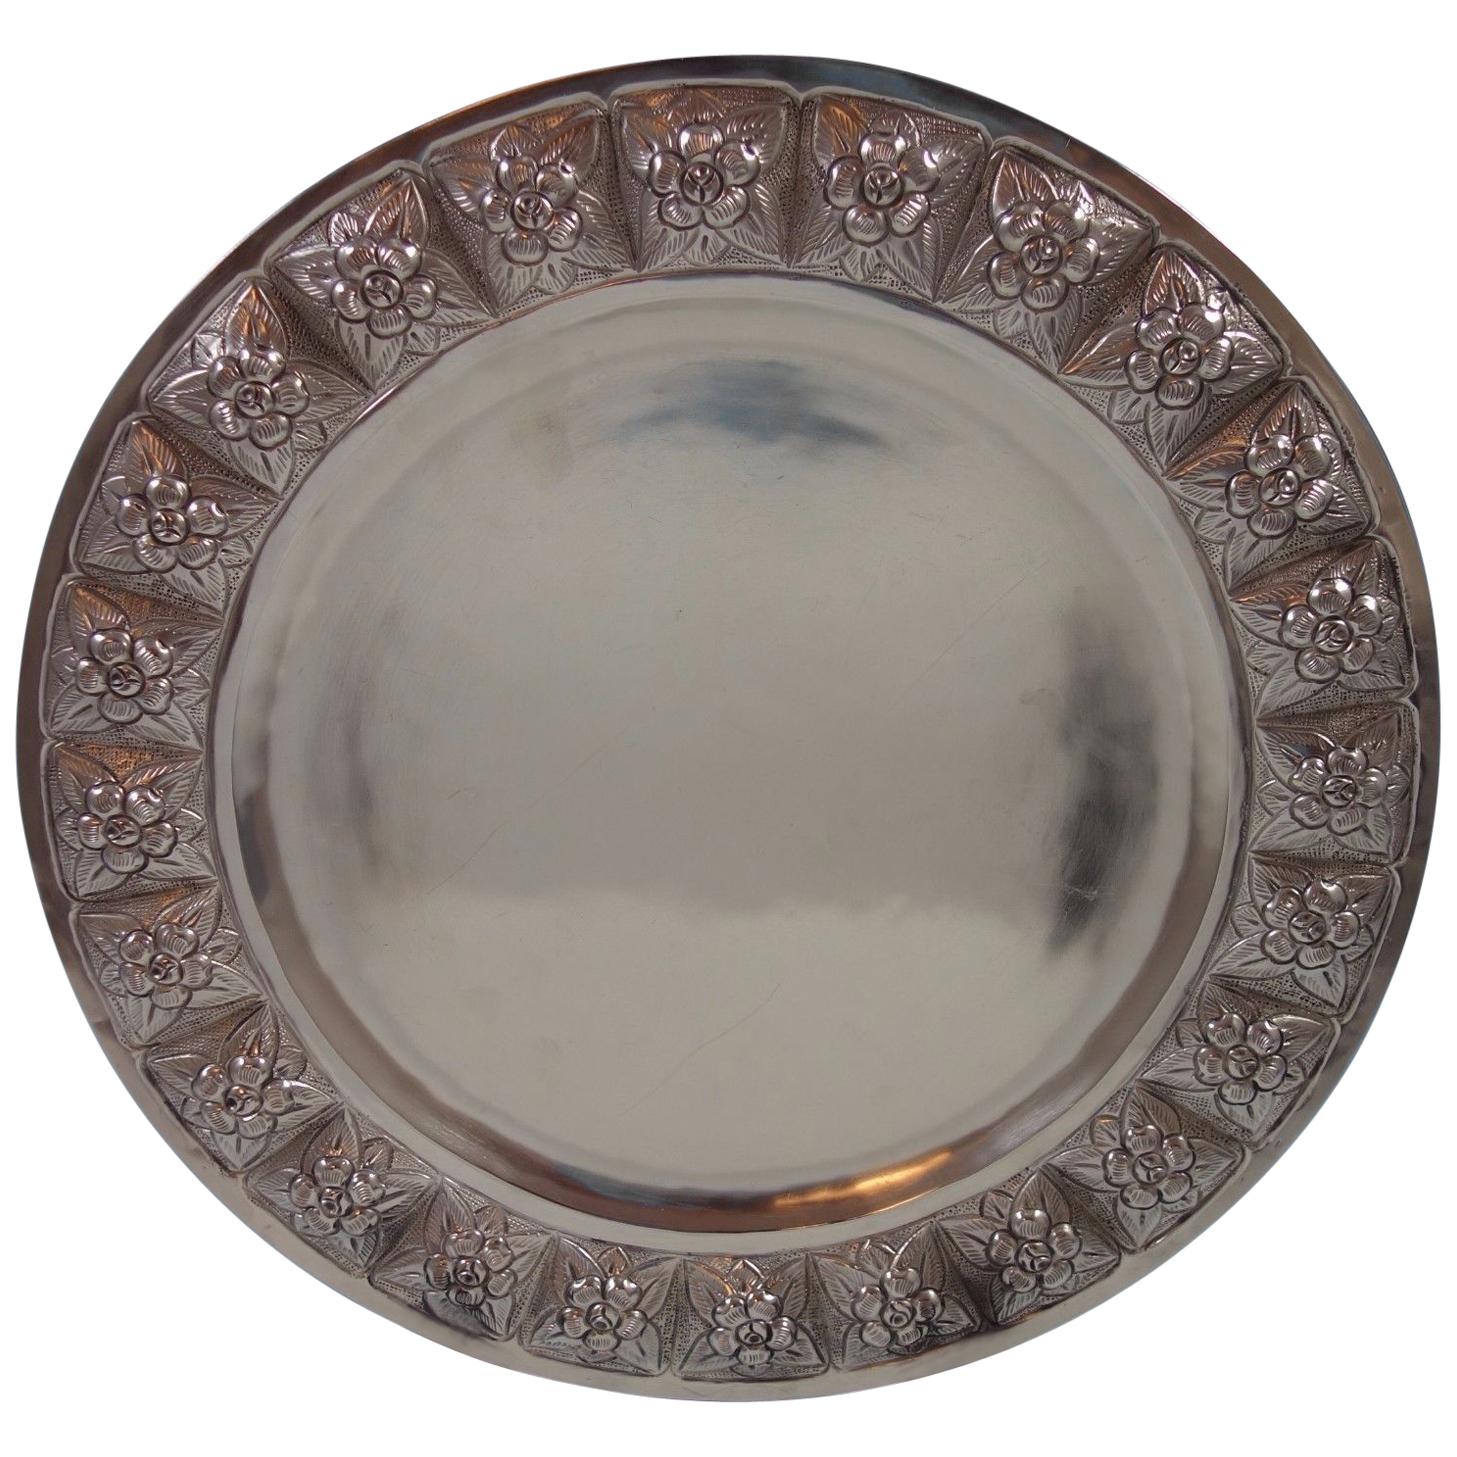 Aztec Rose by Sanborns Mexican Sterling Silver Charger Plate 19.9 ozt